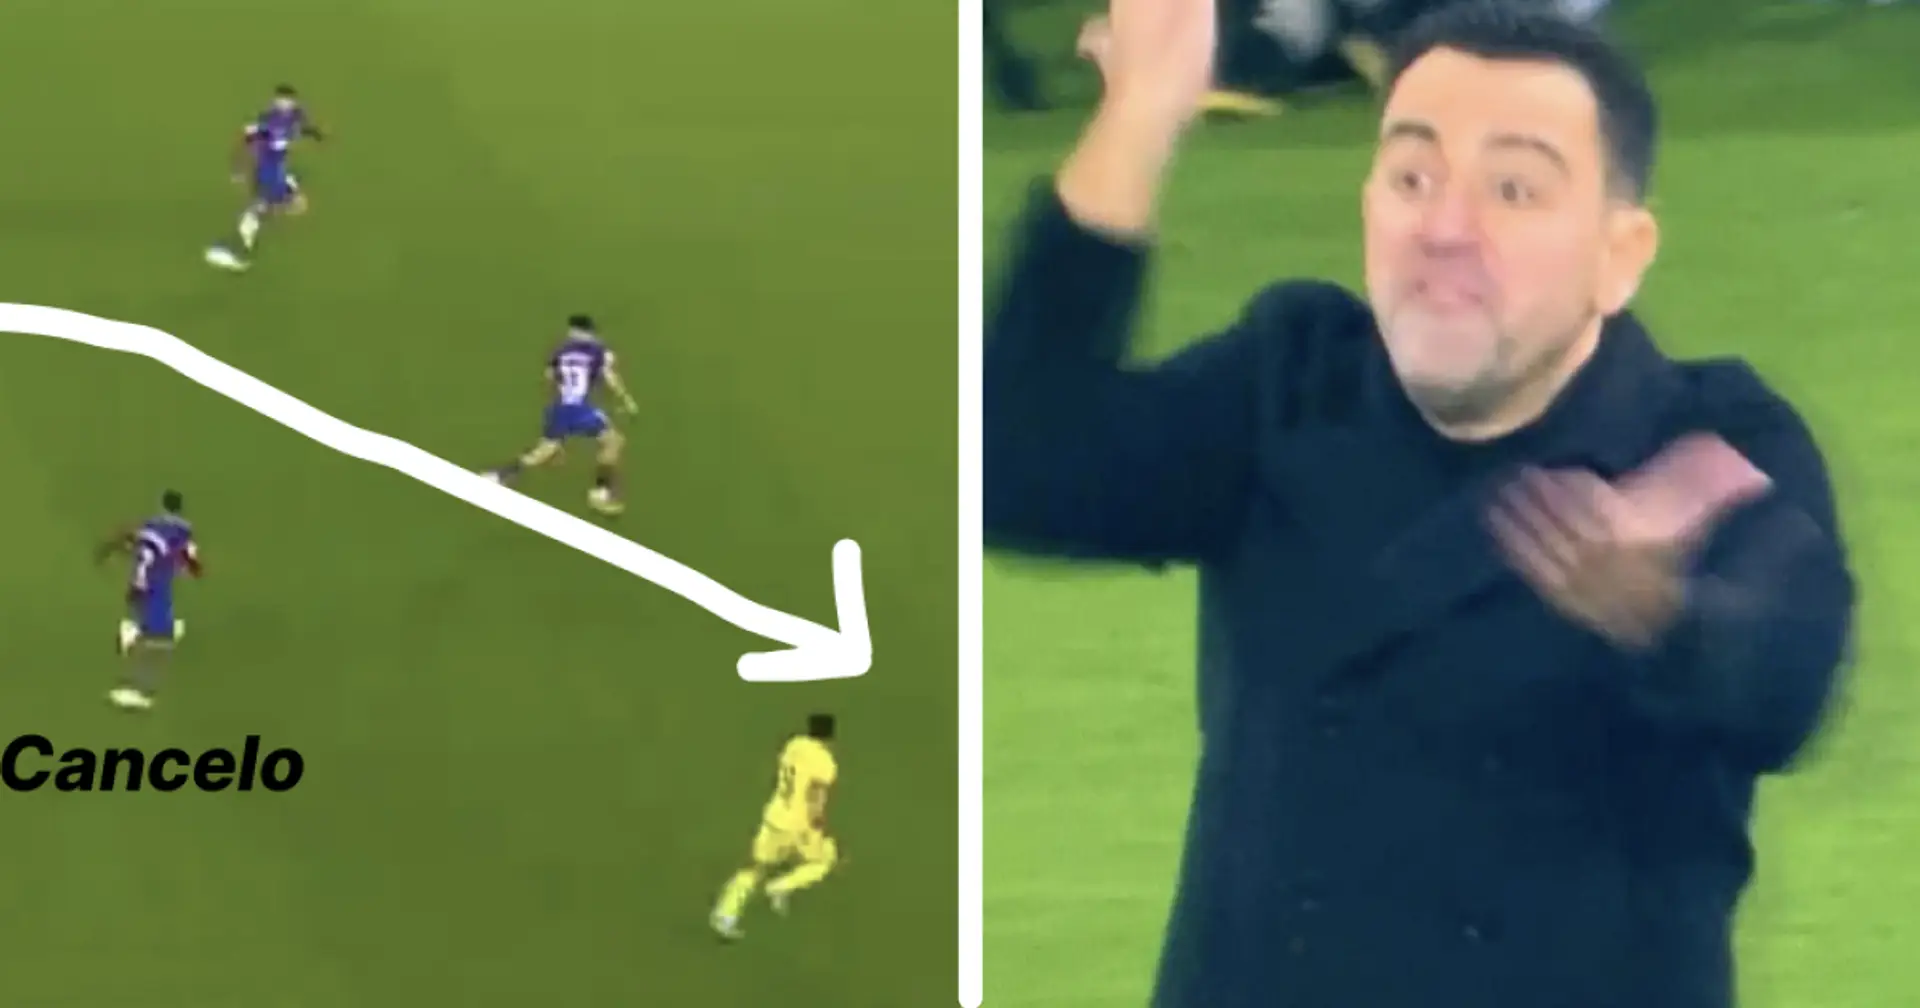 Xavi furious as never before as Barca concede 3rd v Villarreal – possibly because of Cancelo